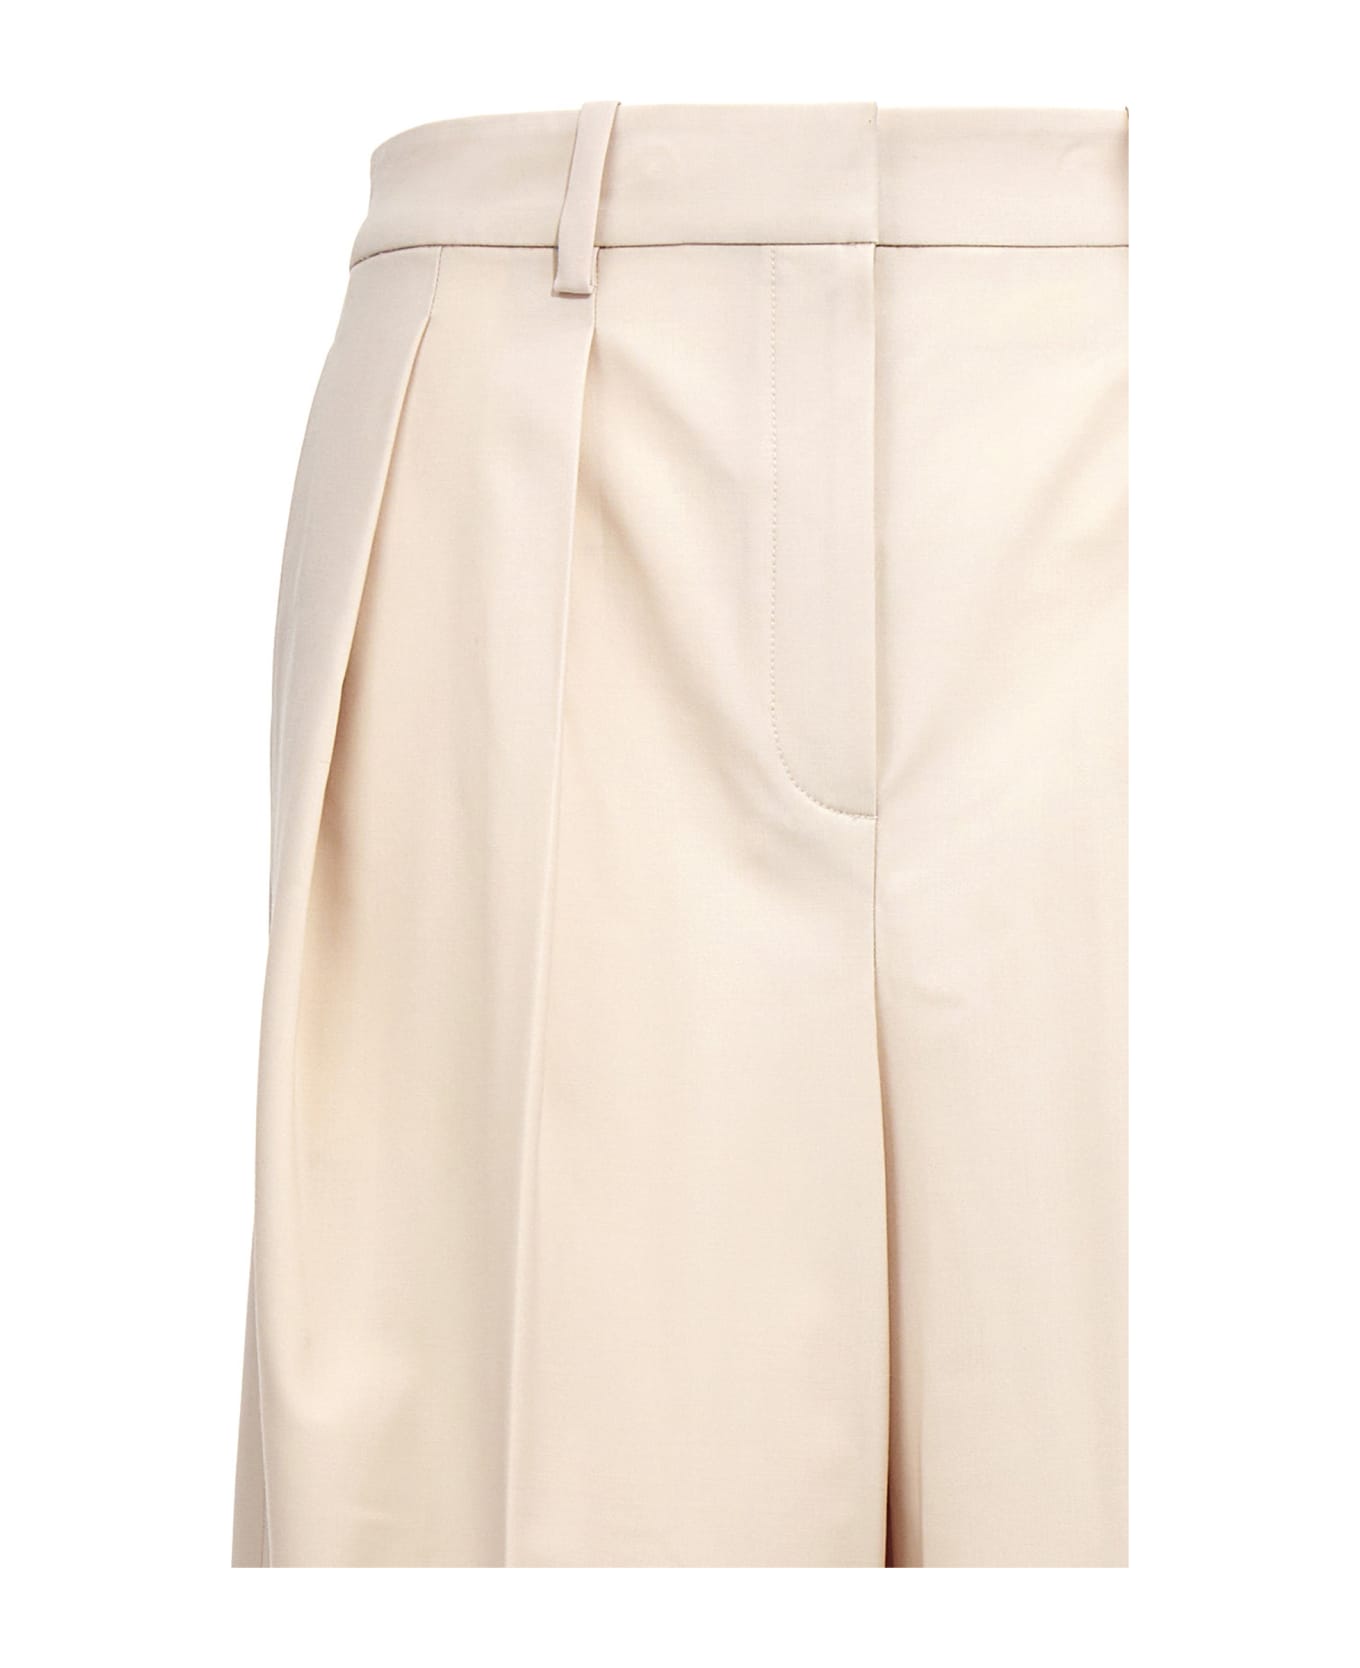 Theory Dbl Pleat' Pants - Sand ボトムス